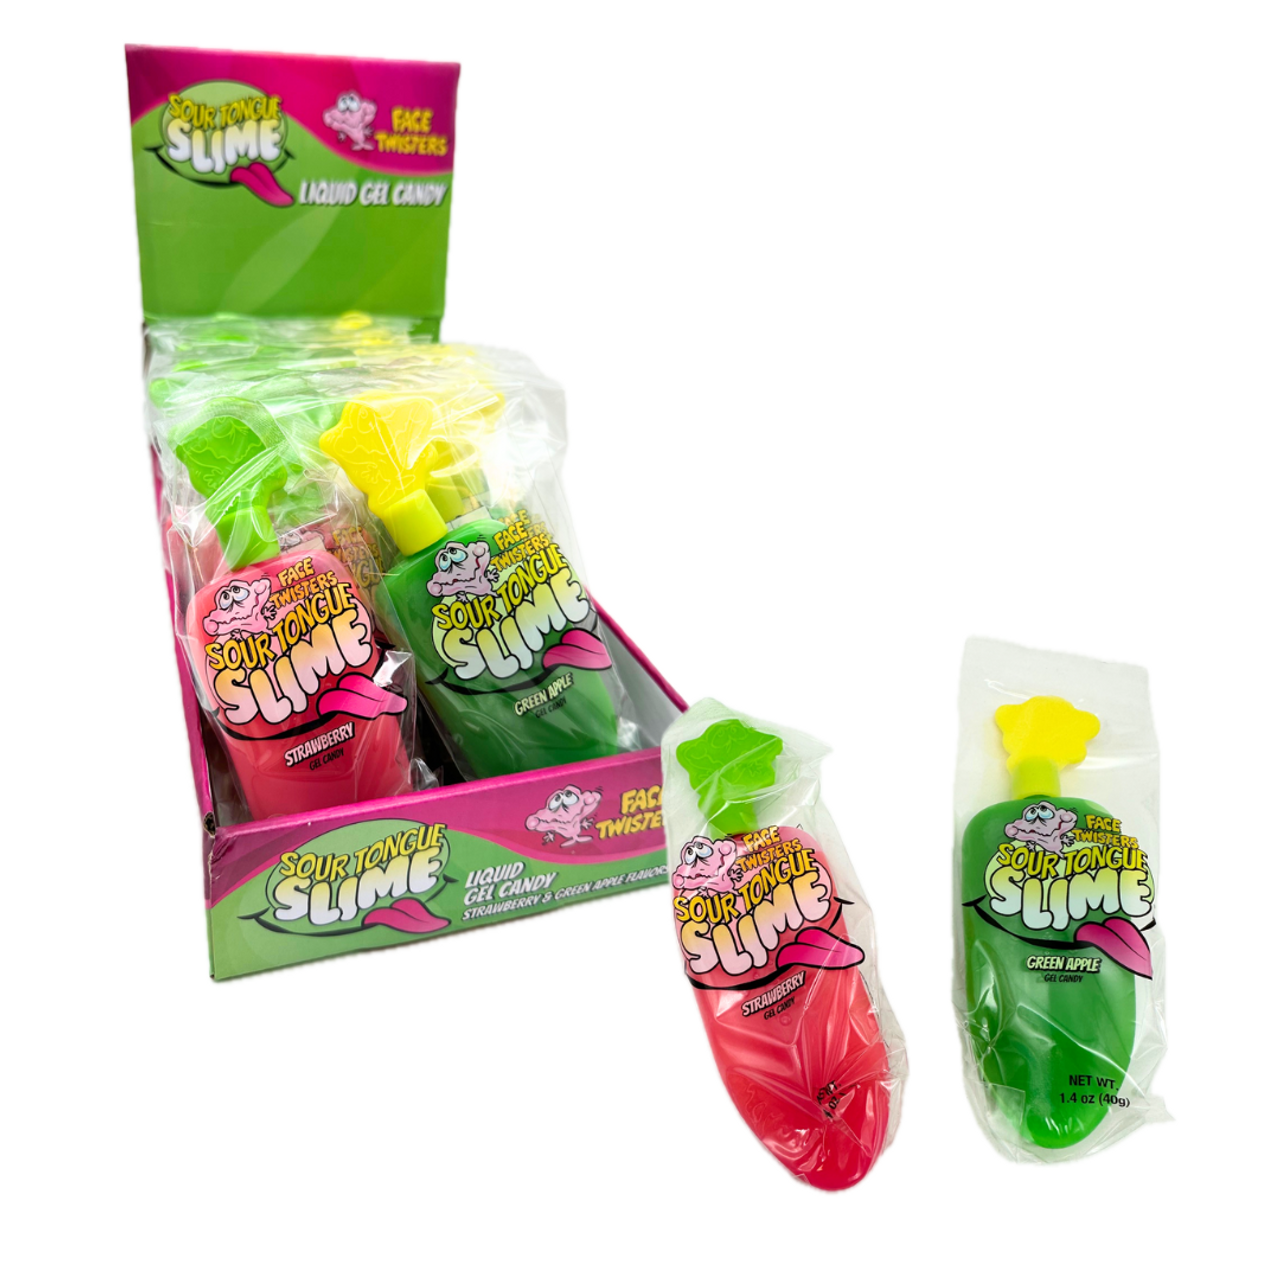 Sour Tongue Slime Liquid Gel Candy - Strawberry / Green Apple - 1.4oz